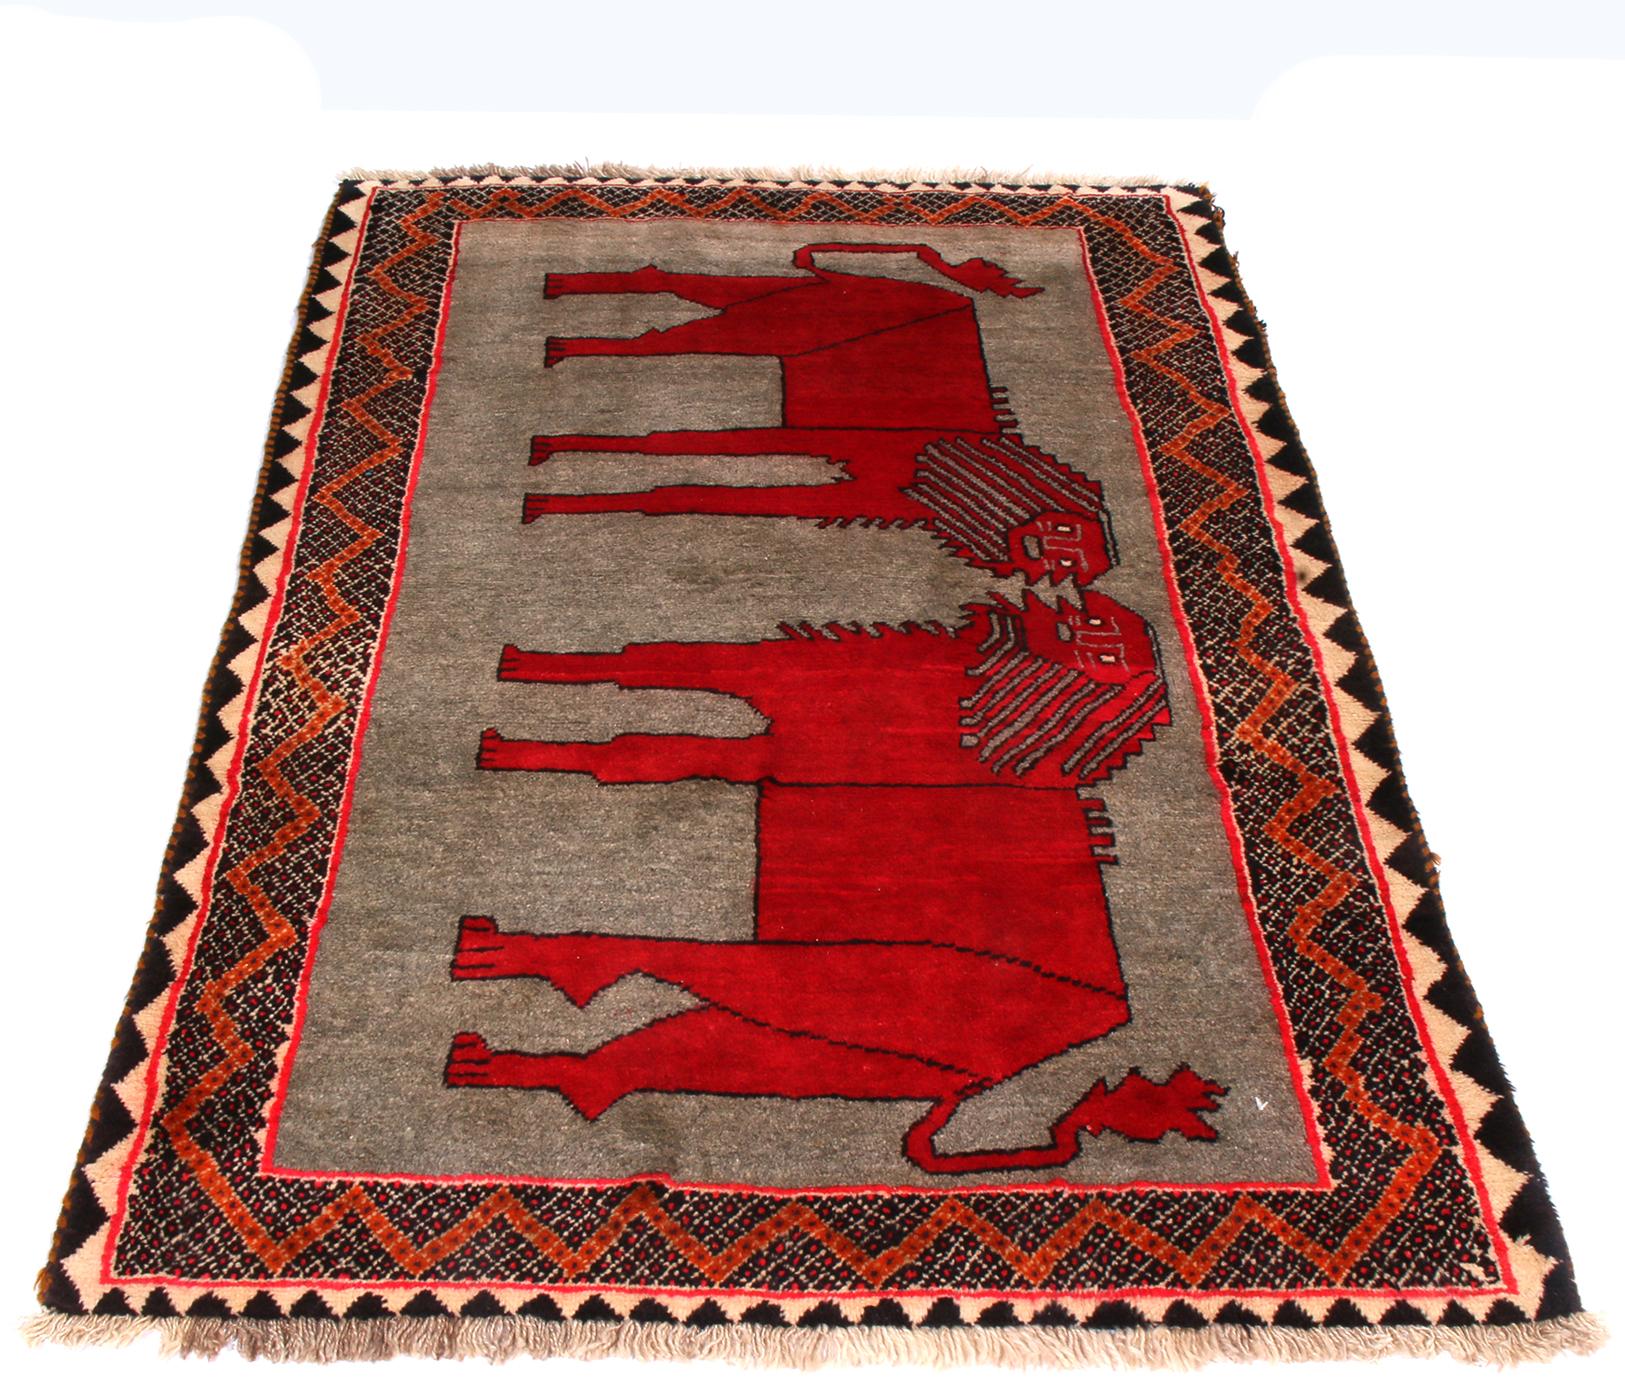 Hand-Knotted Vintage Gabbeh Red and Silver-Gray Wool Persian Rug with Geometric Pictorial Lio